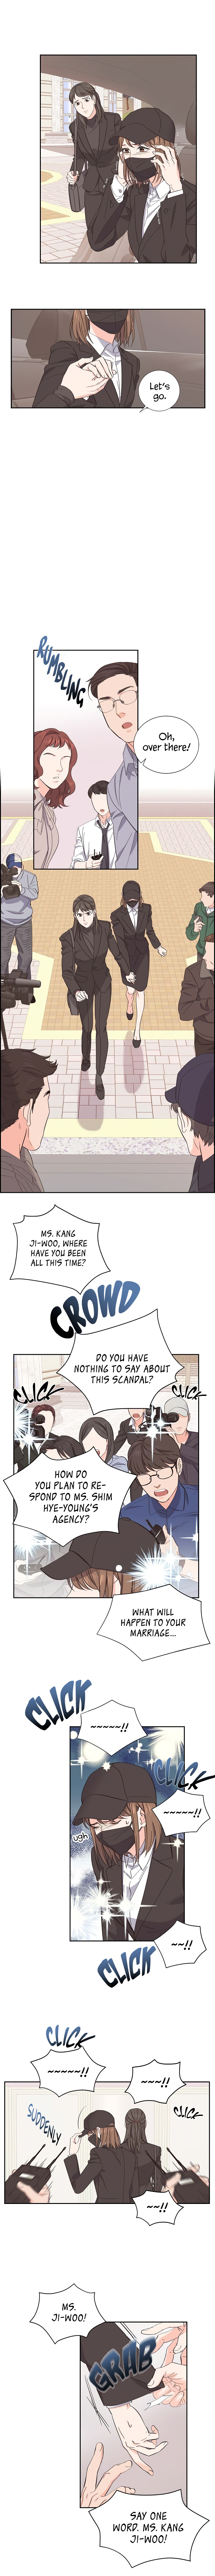 Scandal chapter 4 - page 4